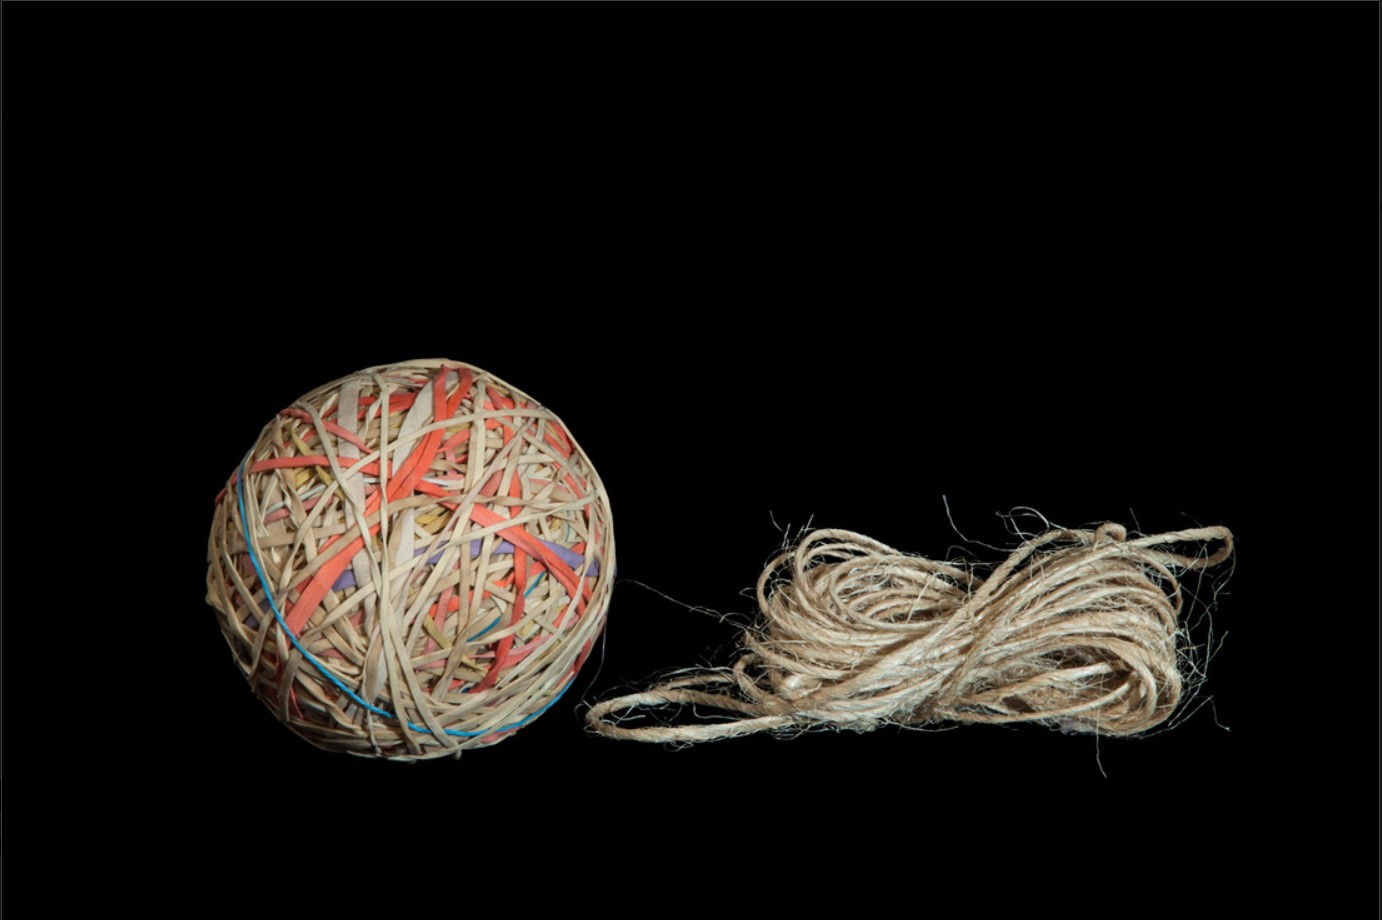 rubber band ball next to twine